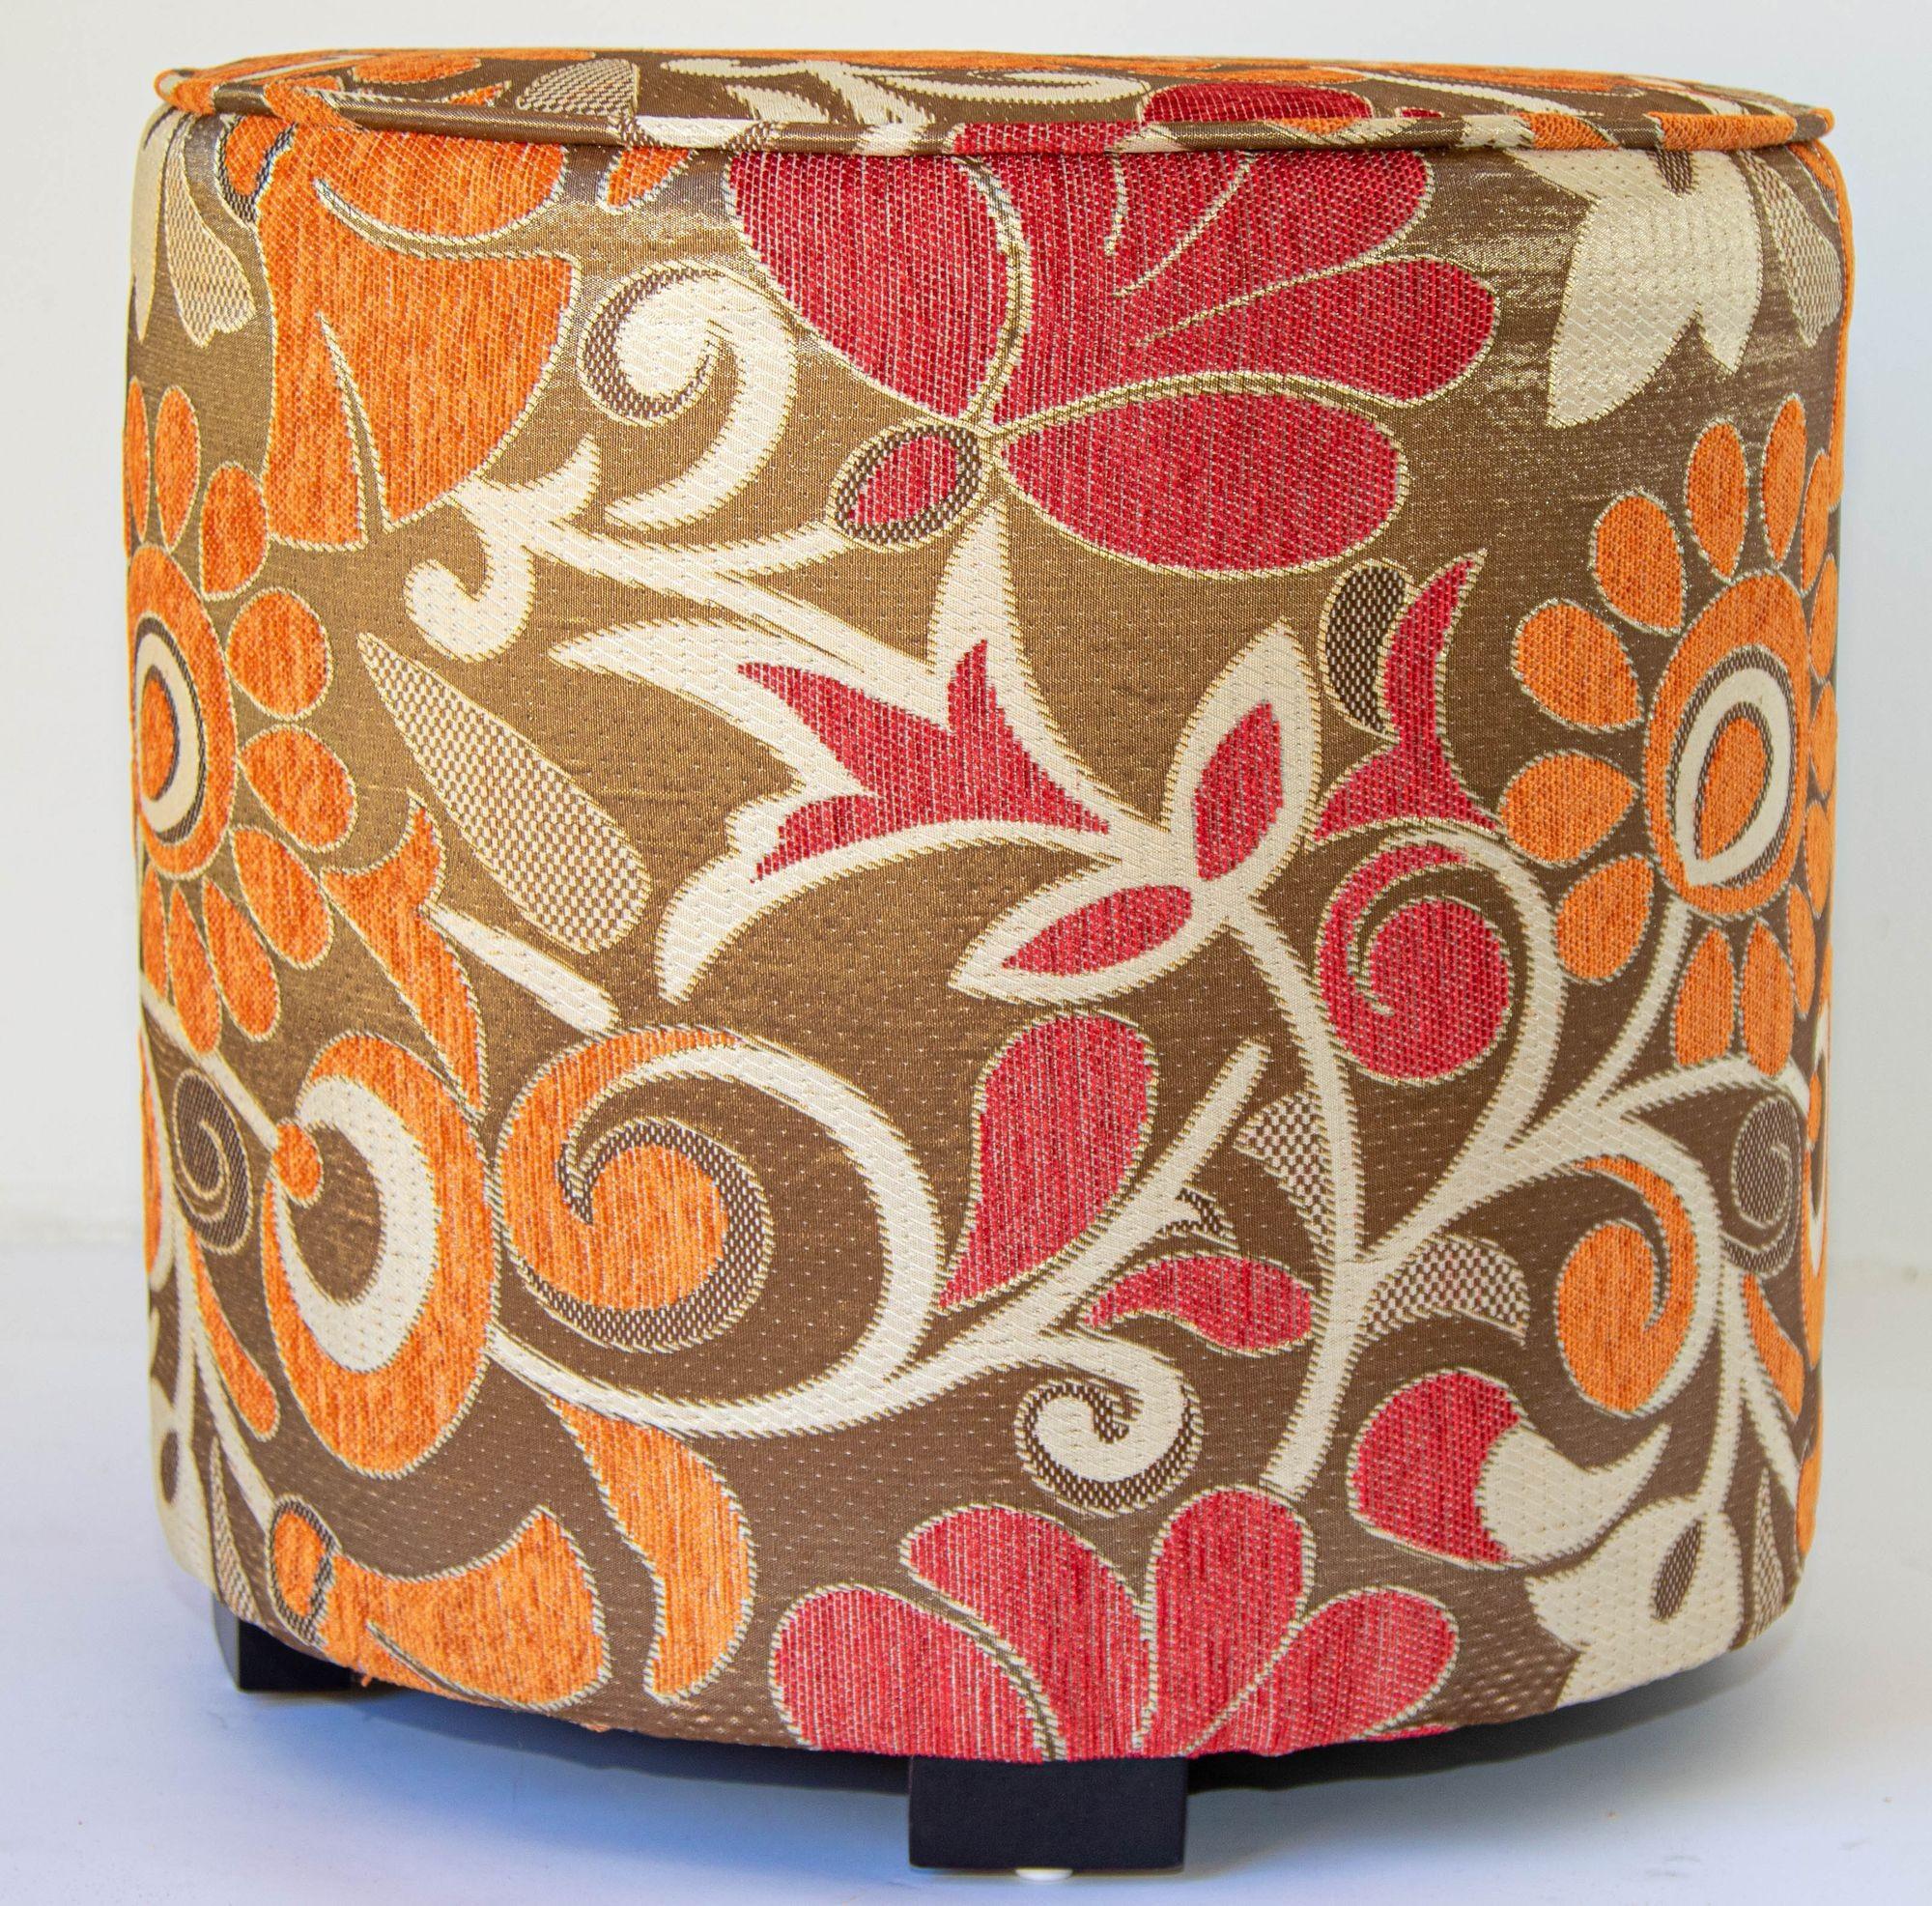 Modern Moroccan Art Deco Style pouf in bronze, red, white and red psychedelic velvet fabric upholstery in 1970s style. 
Modern contemporary round Moroccan Art Deco Style upholstered stools in multicolor bold fabric in 1970s style. 
Moroccan little